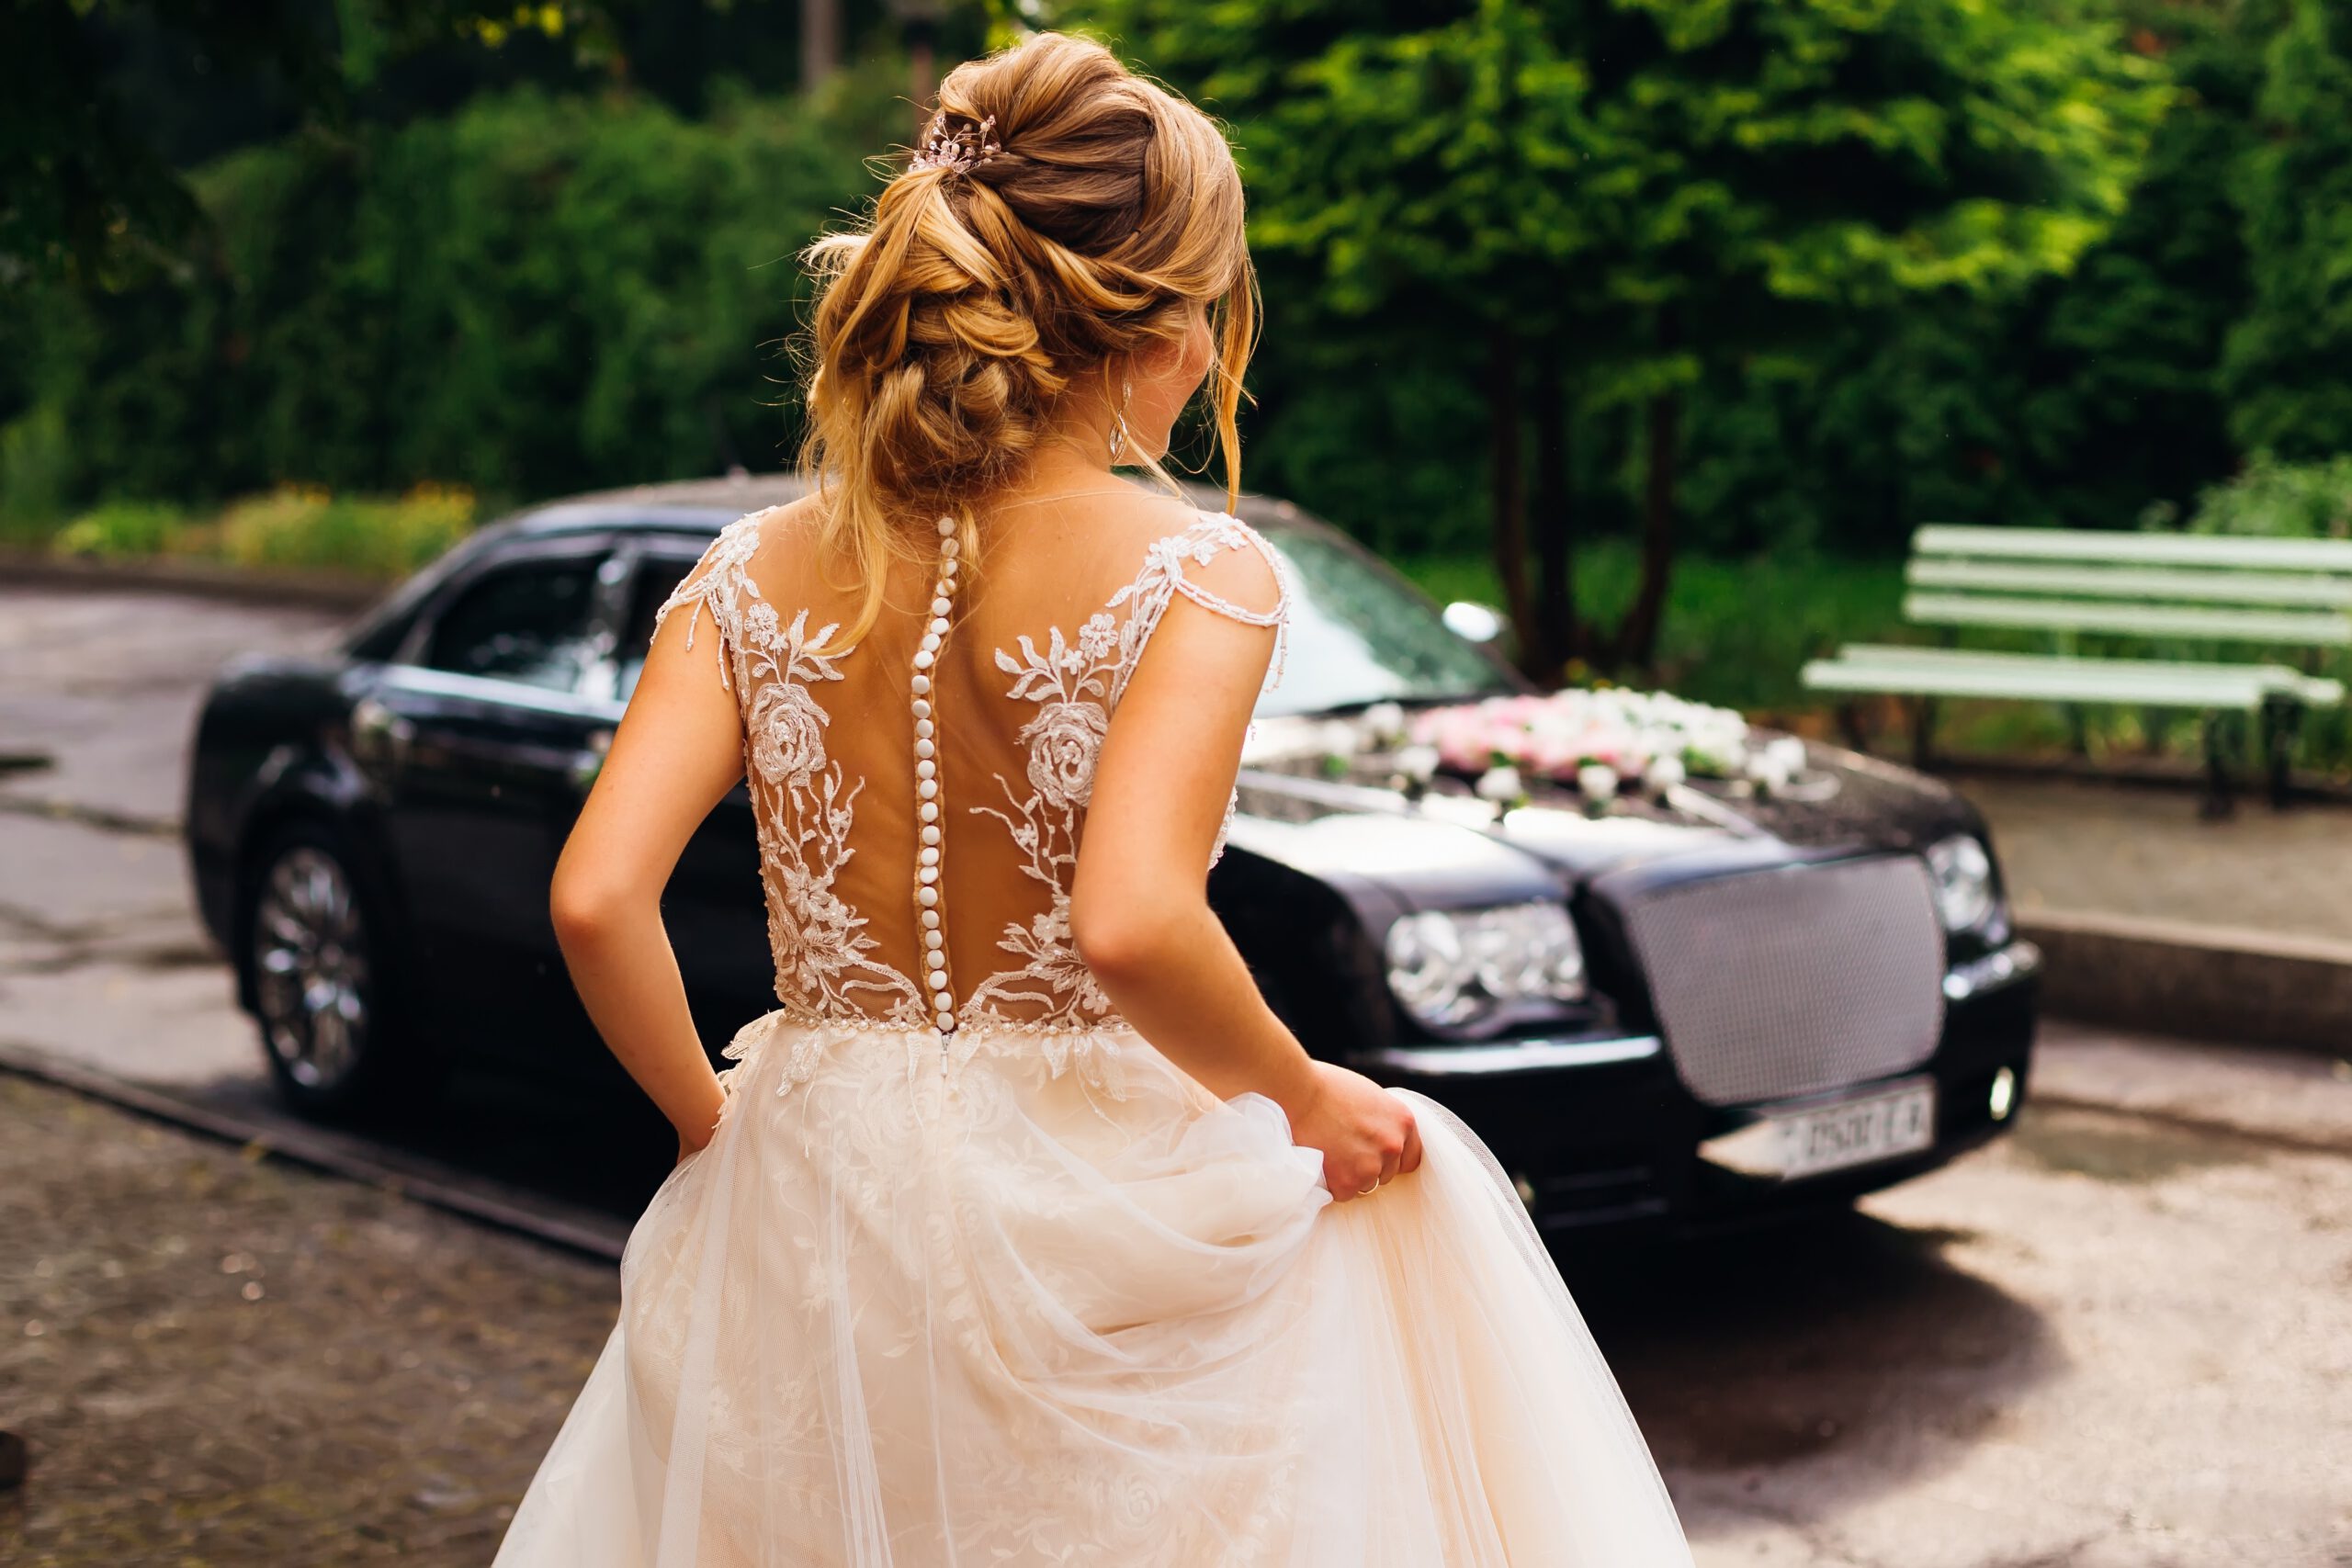 bride goes to the wedding car